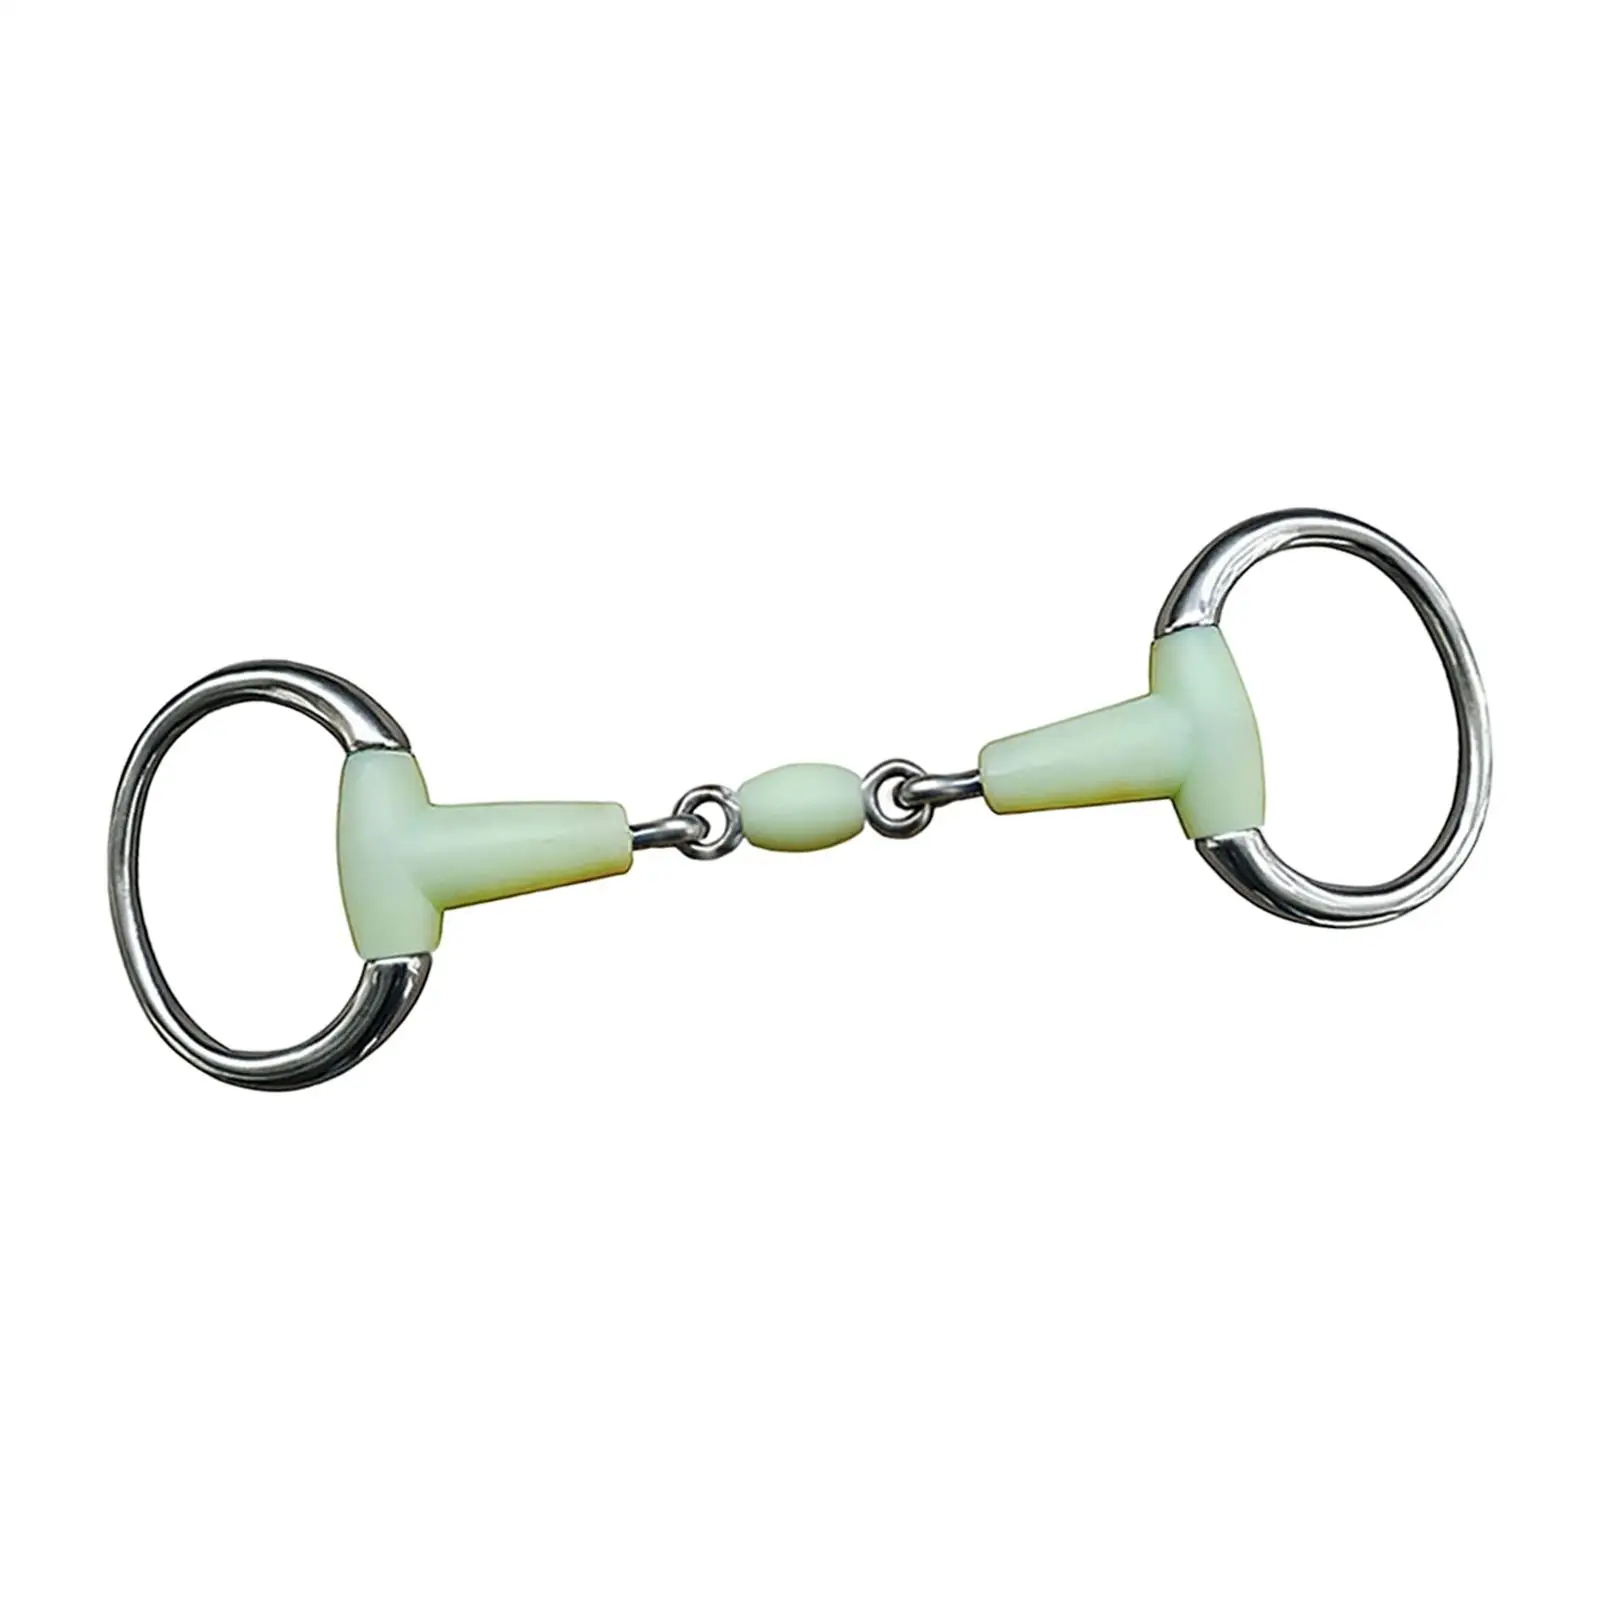 Horse Ring Bit Horse Training Stainless Steel for Horse Riding